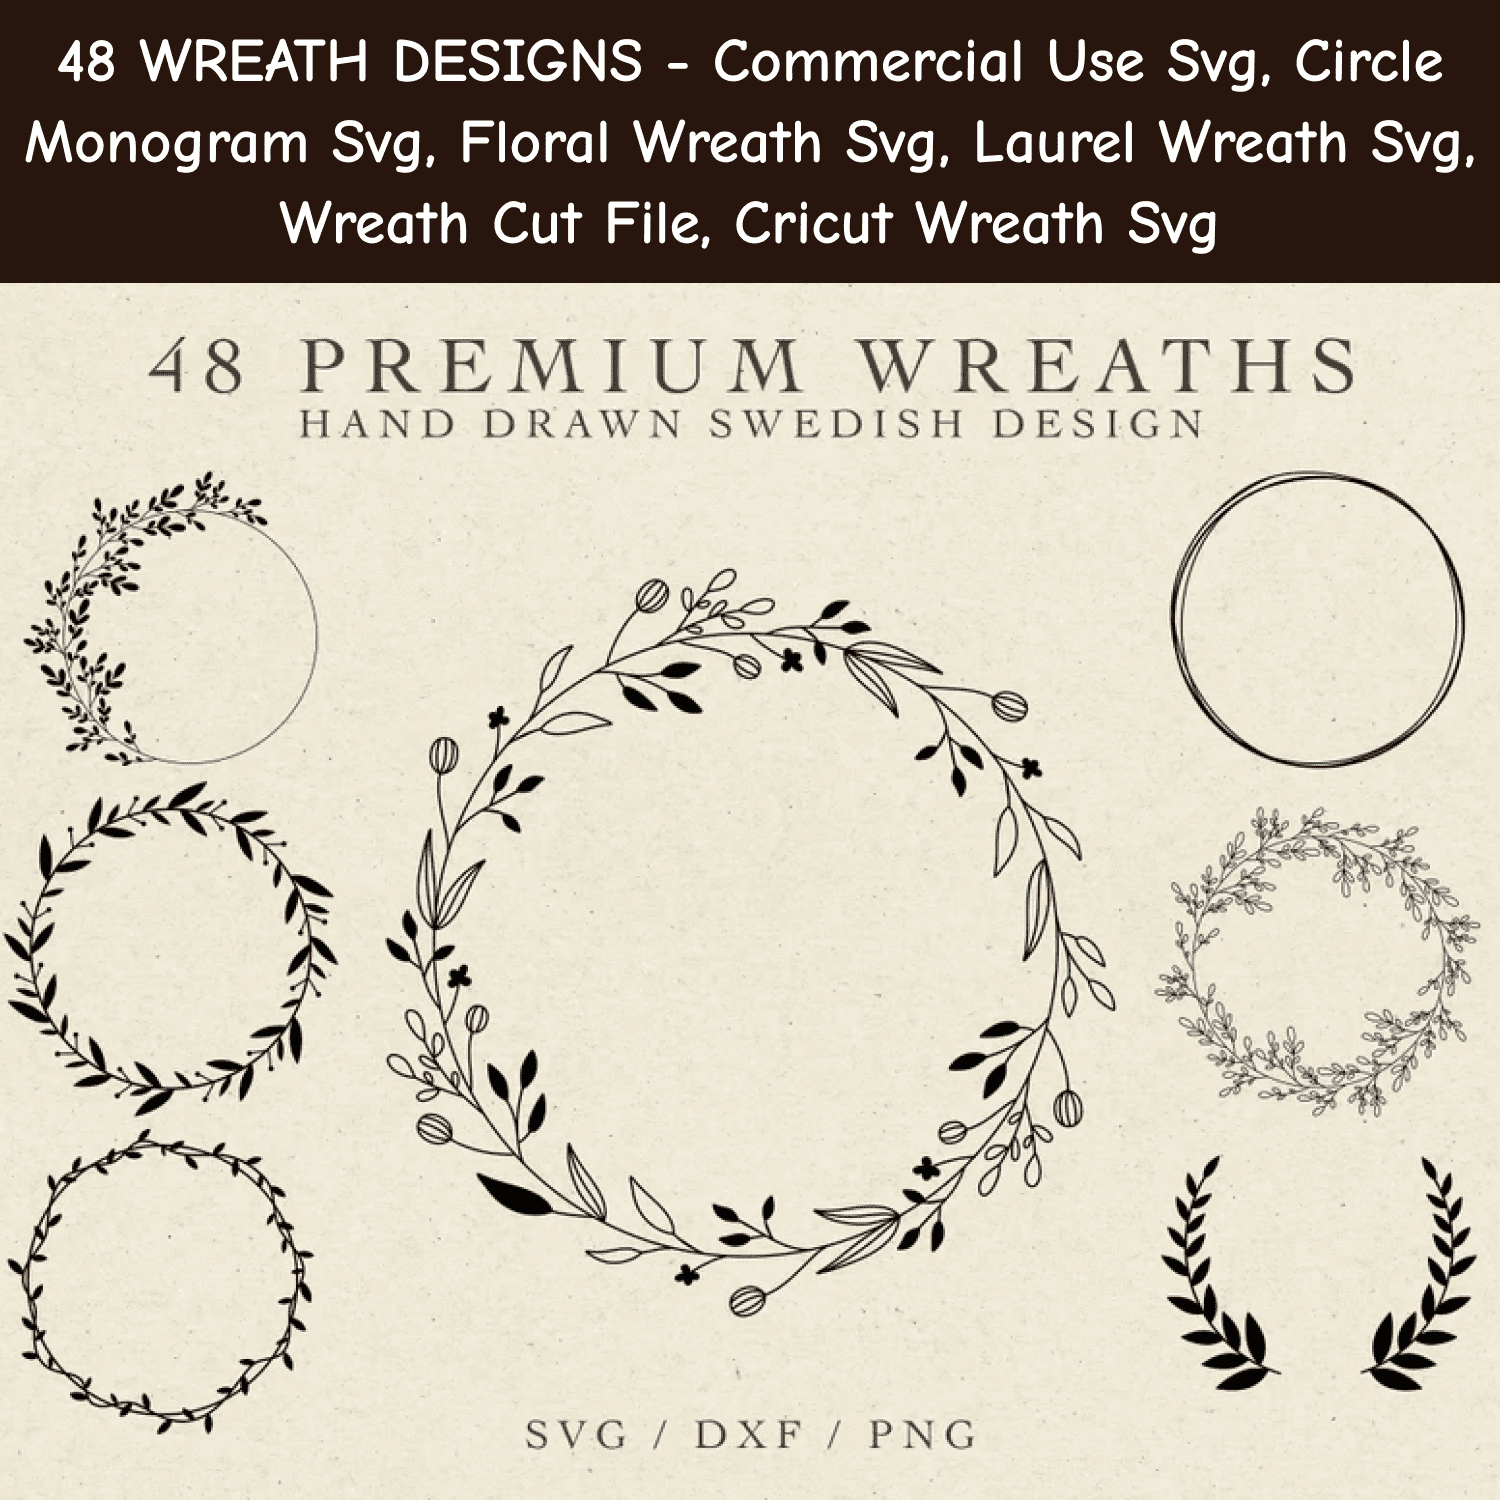 48 Wreath Designs - Commercial Use SVG.